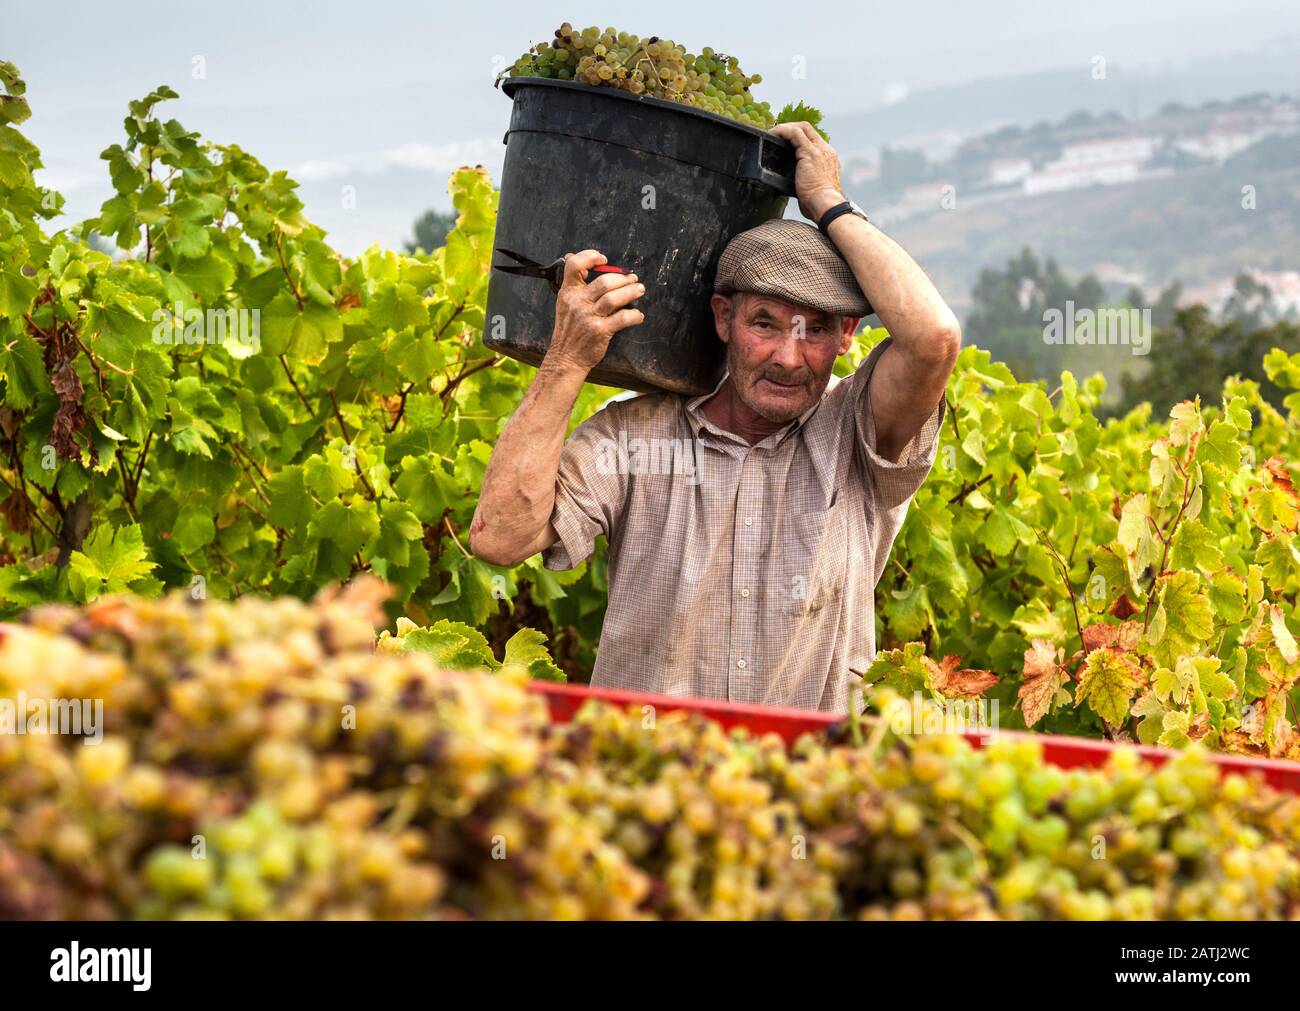 Farmer carrying a container of harvested grapes on a vineyard in Portugal Stock Photo